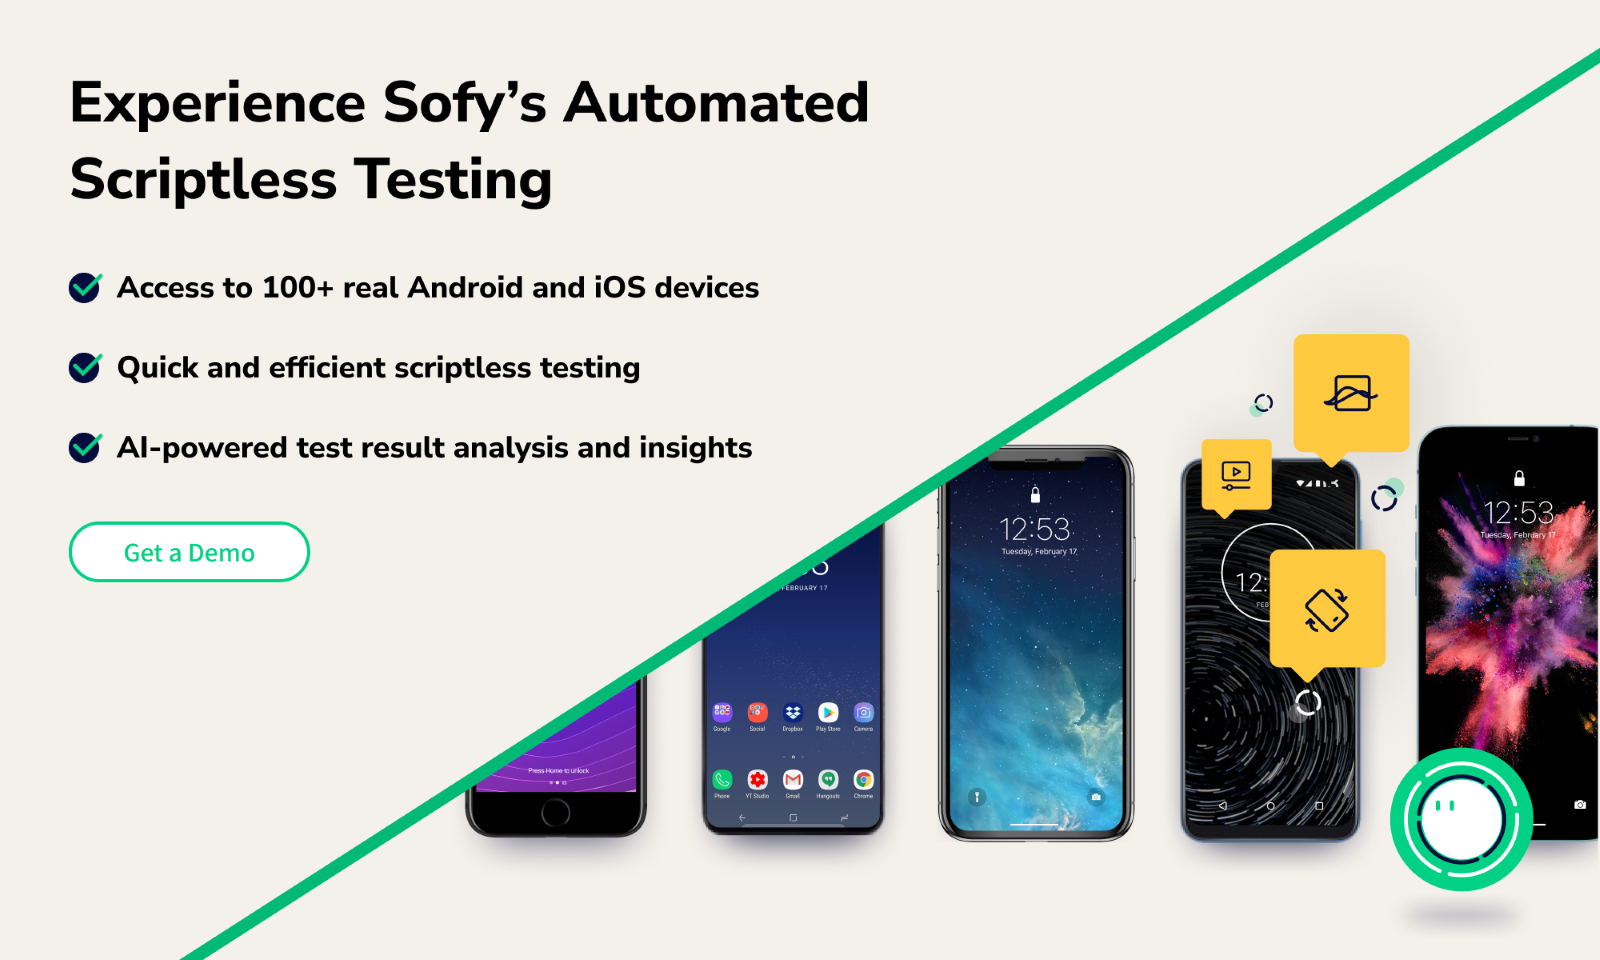 Graphic explaining how Sofy's automated scriptless testing can improve and streamline the testing process.